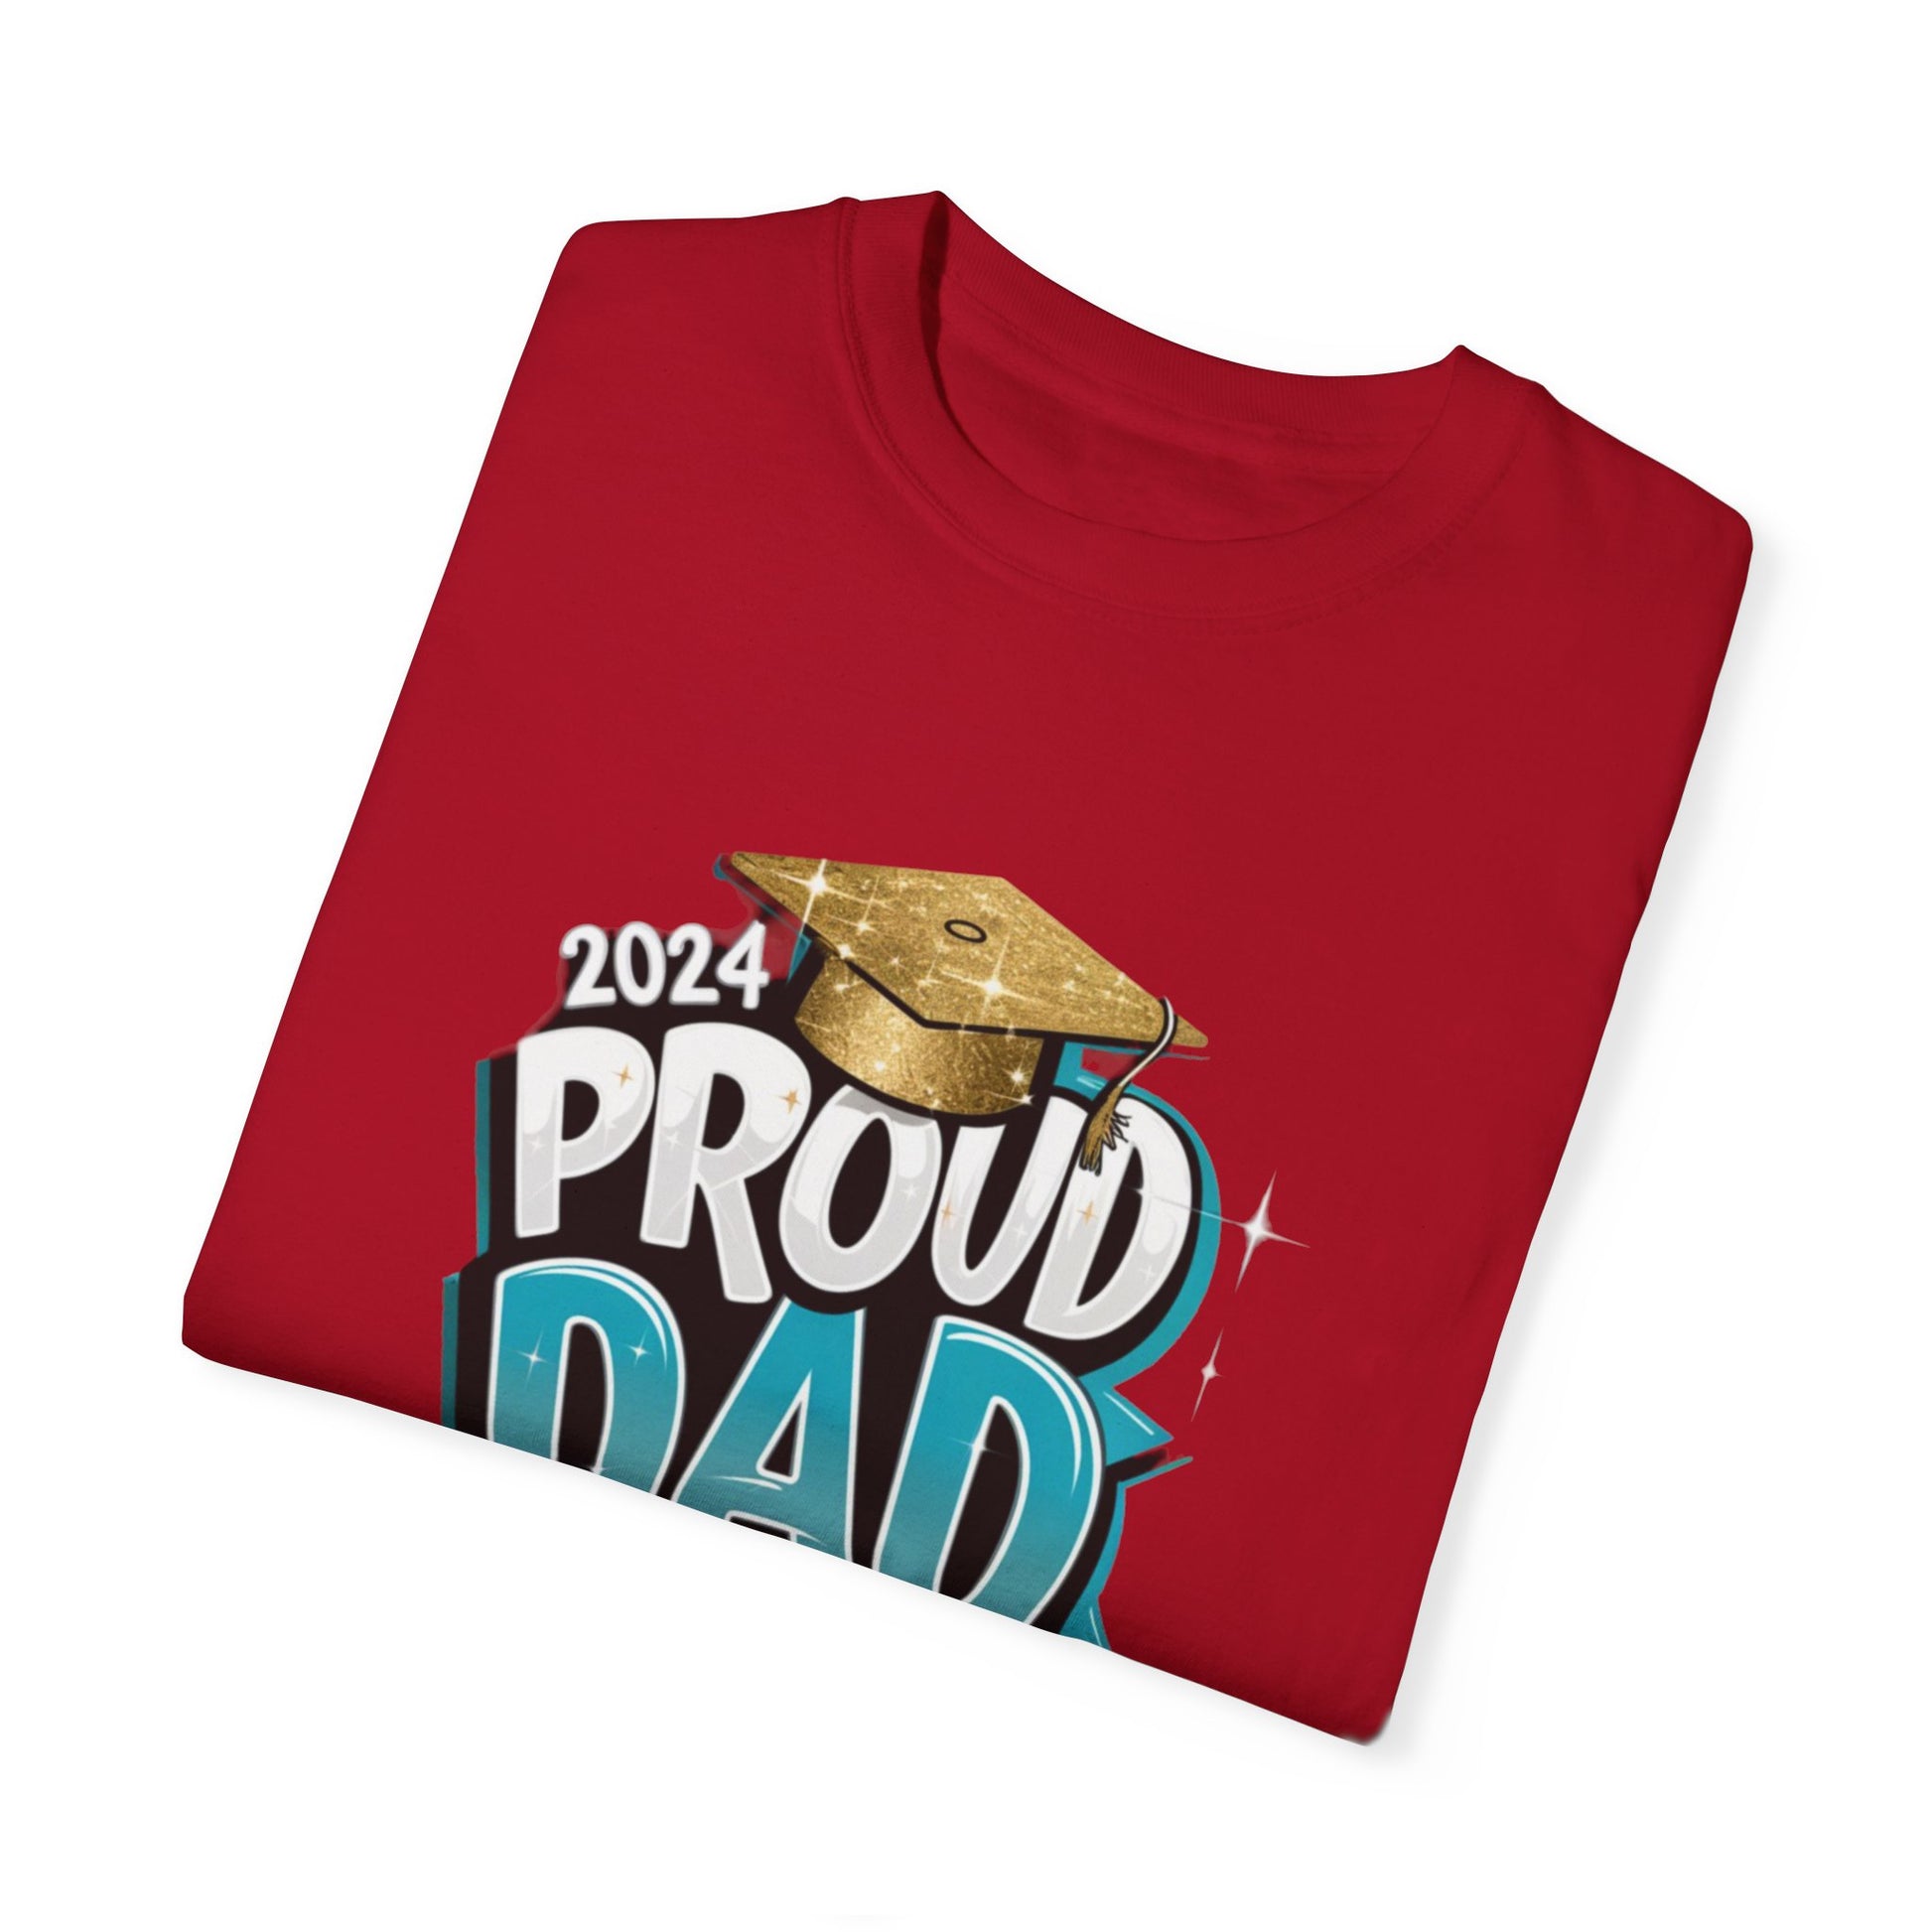 Proud Dad of a 2024 Graduate Unisex Garment-dyed T-shirt Cotton Funny Humorous Graphic Soft Premium Unisex Men Women Red T-shirt Birthday Gift-20